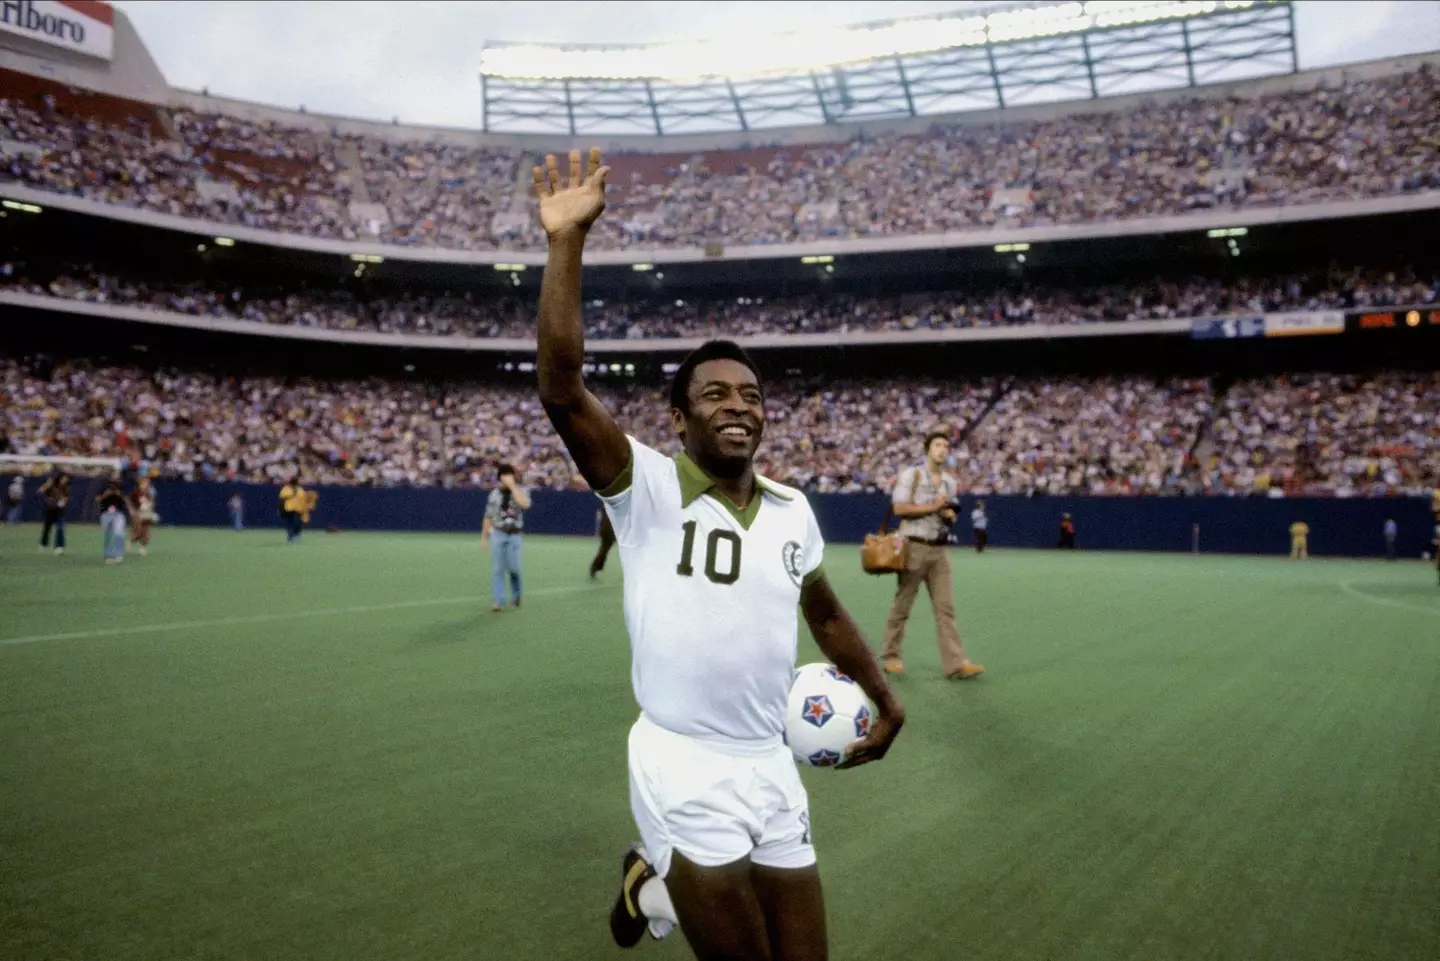 Pele is the only player to win the World Cup three times.